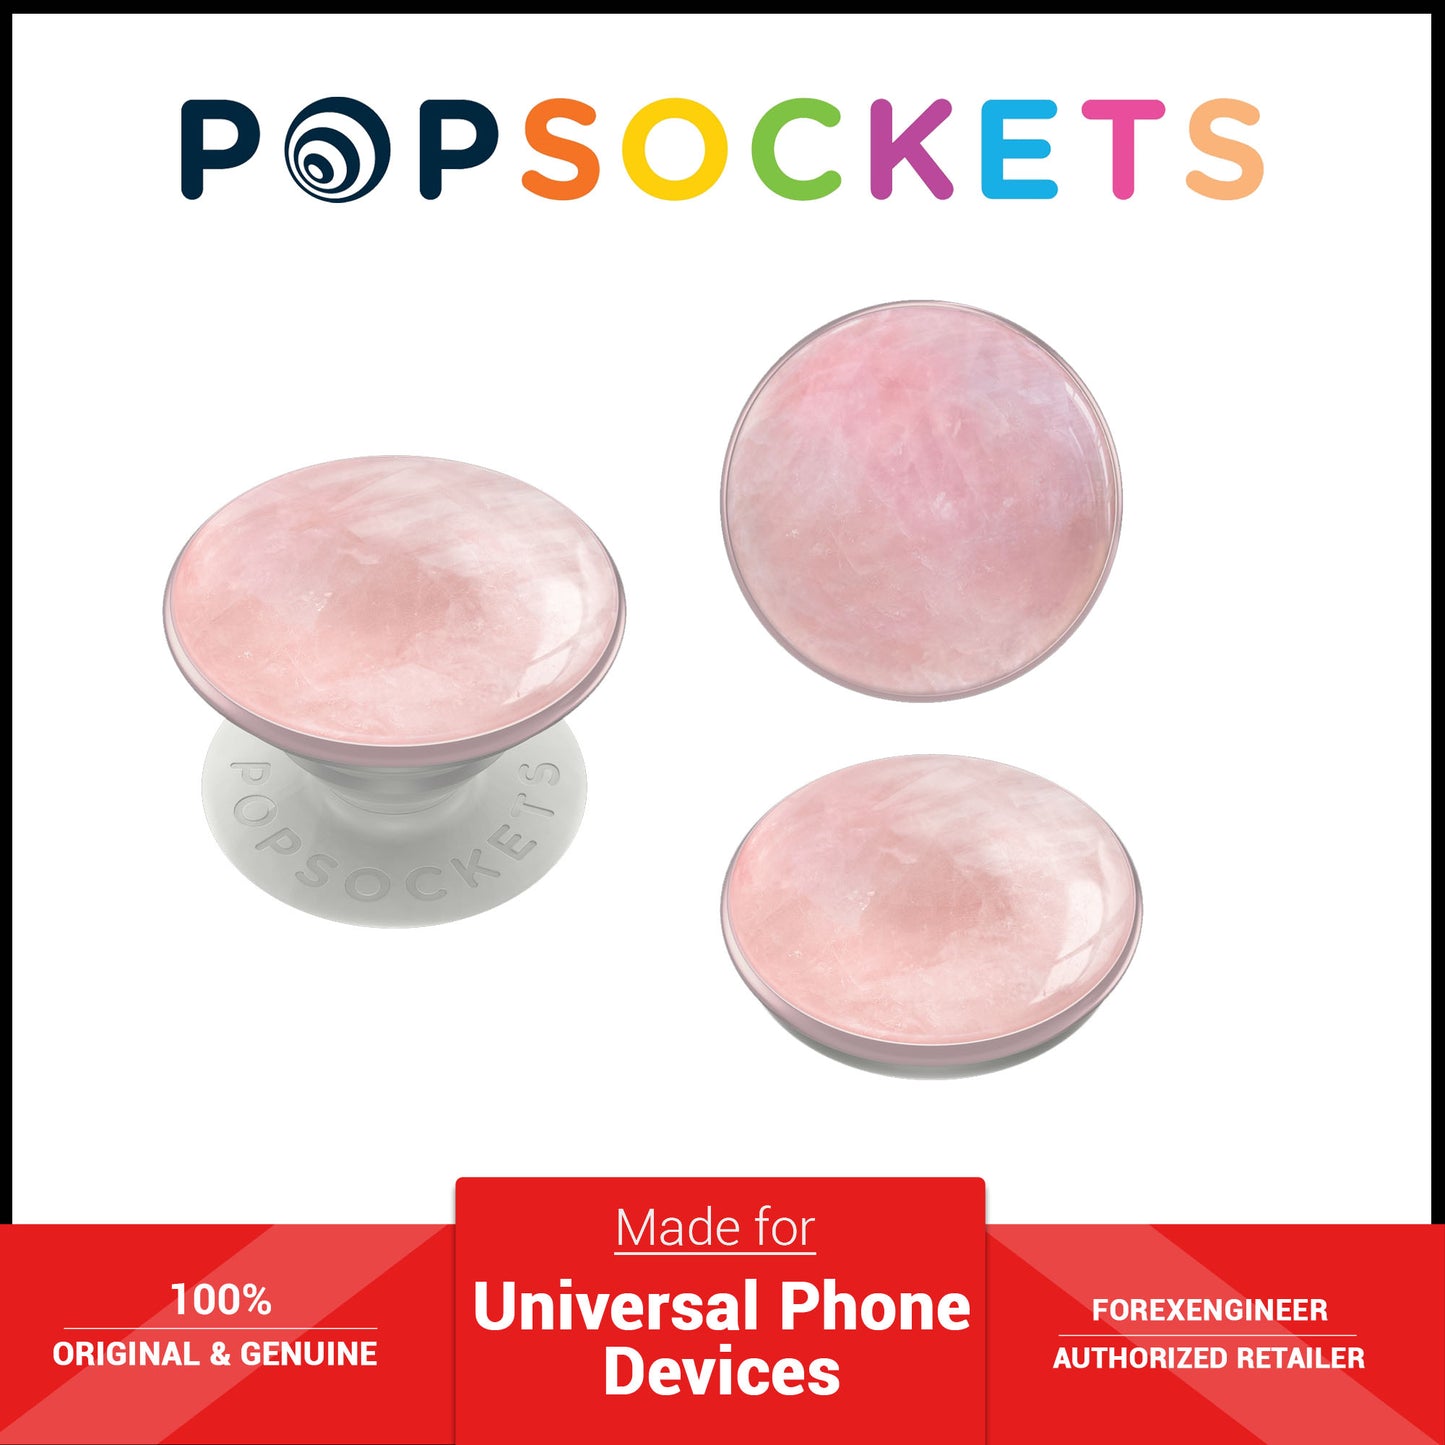 PopSockets Swappable Luxe - Genuine Rose Quartz (Barcode: 842978158587 )